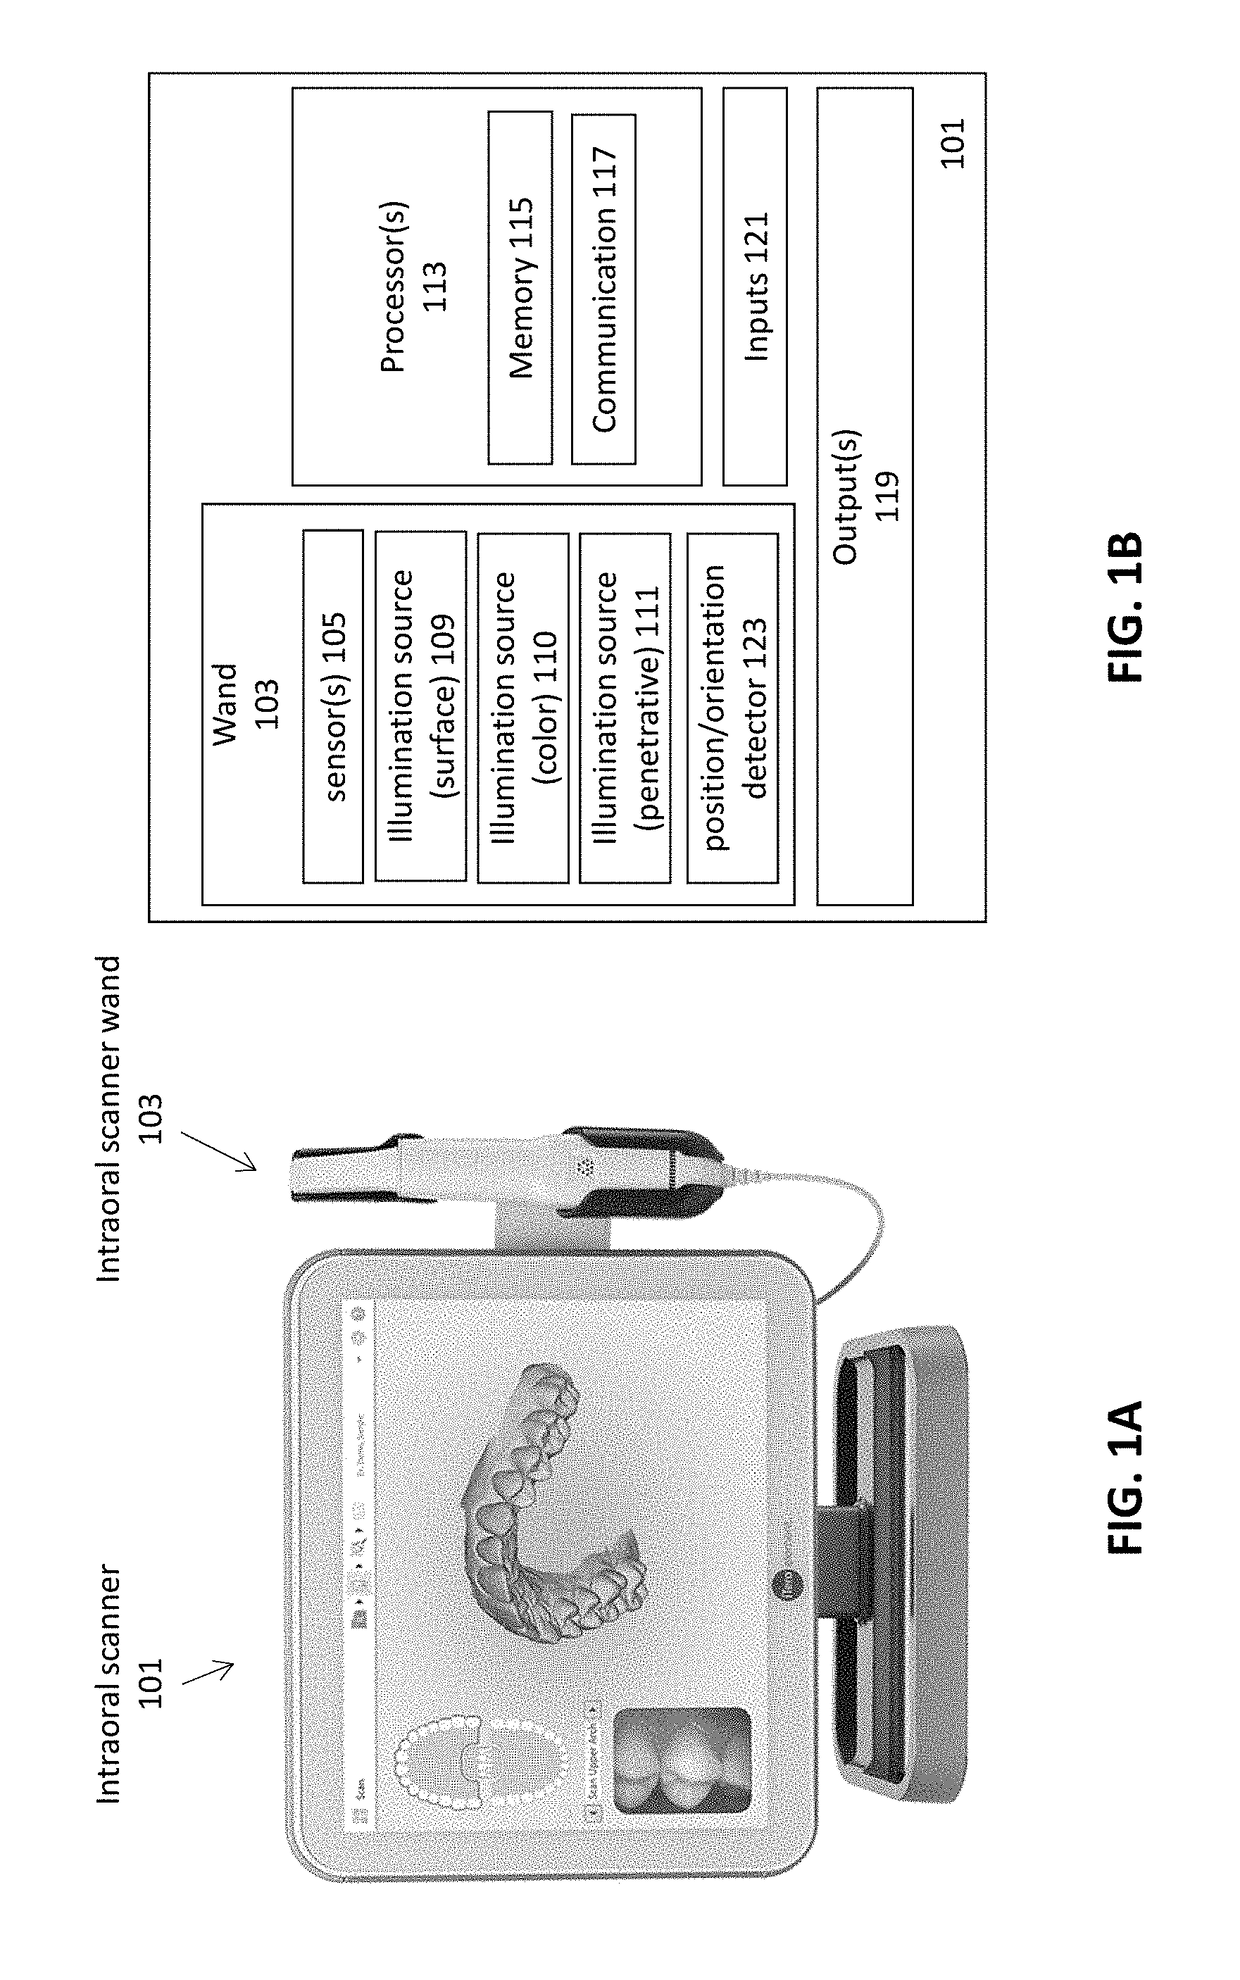 Intraoral scanner with dental diagnostics capabilities